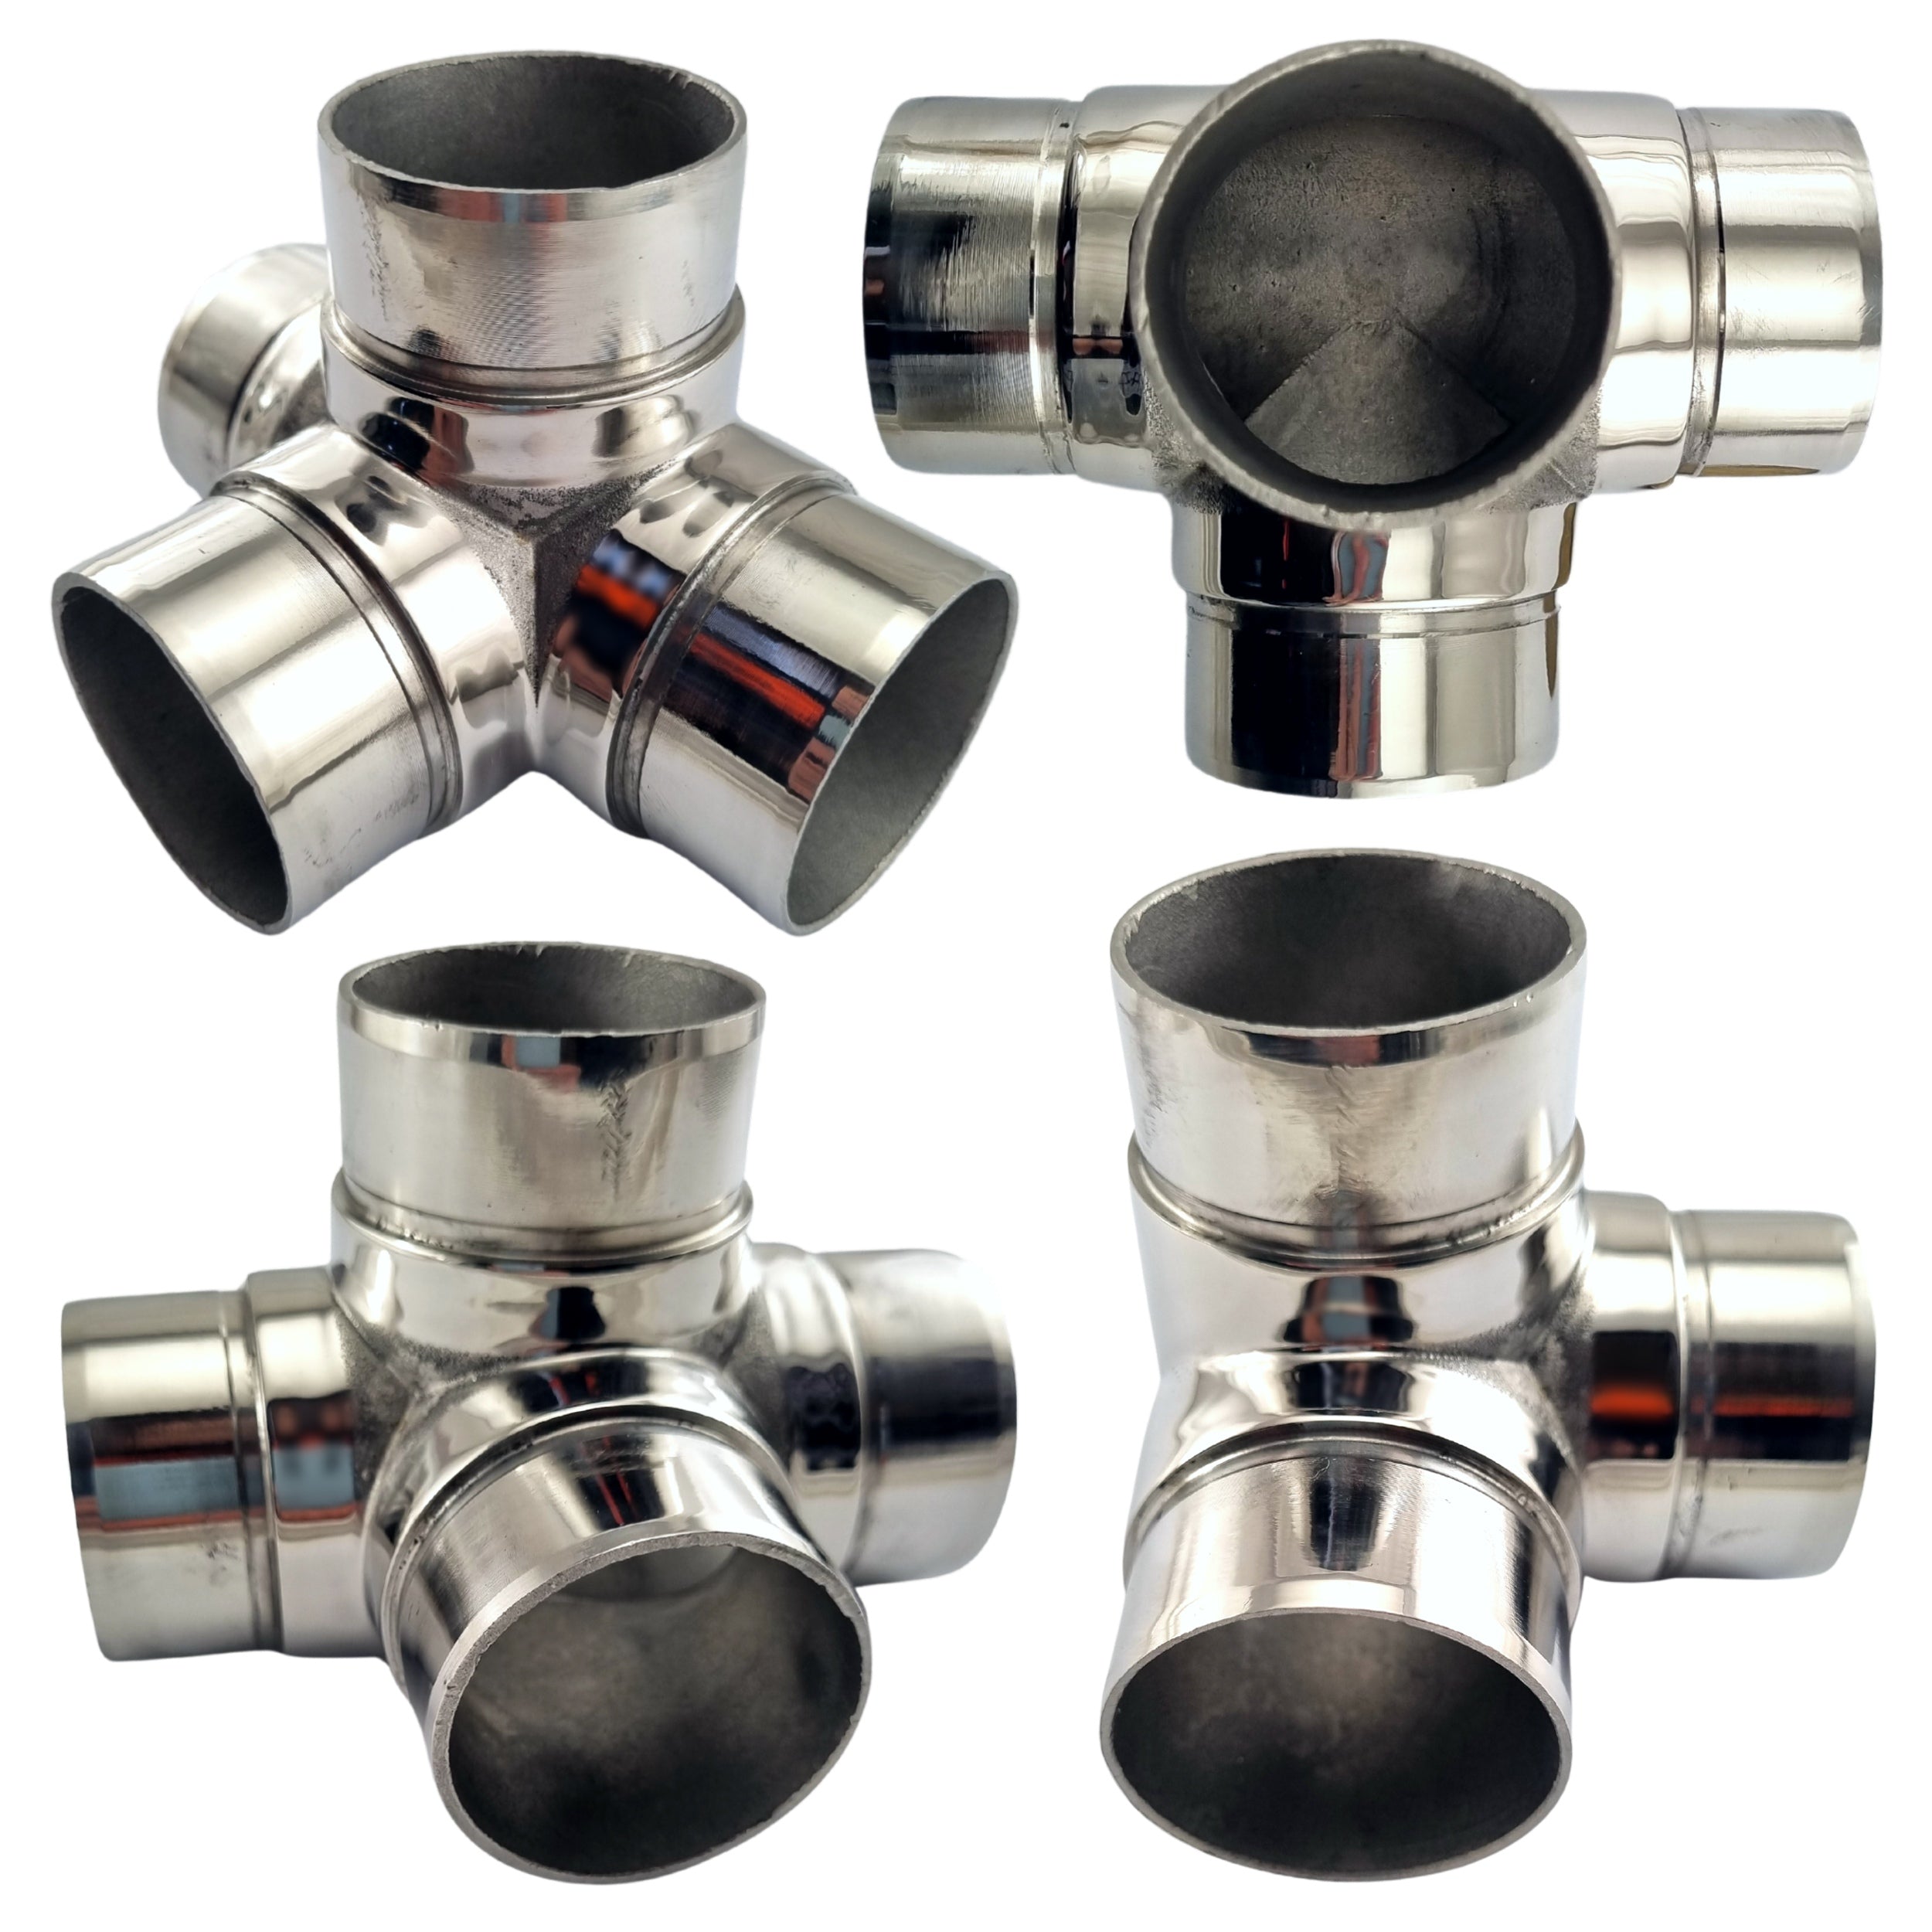 90° 4 Way Stainless Steel Rail Fitting for 50.8mm pipe. Australia wide shipping. Shop: chain.com.au